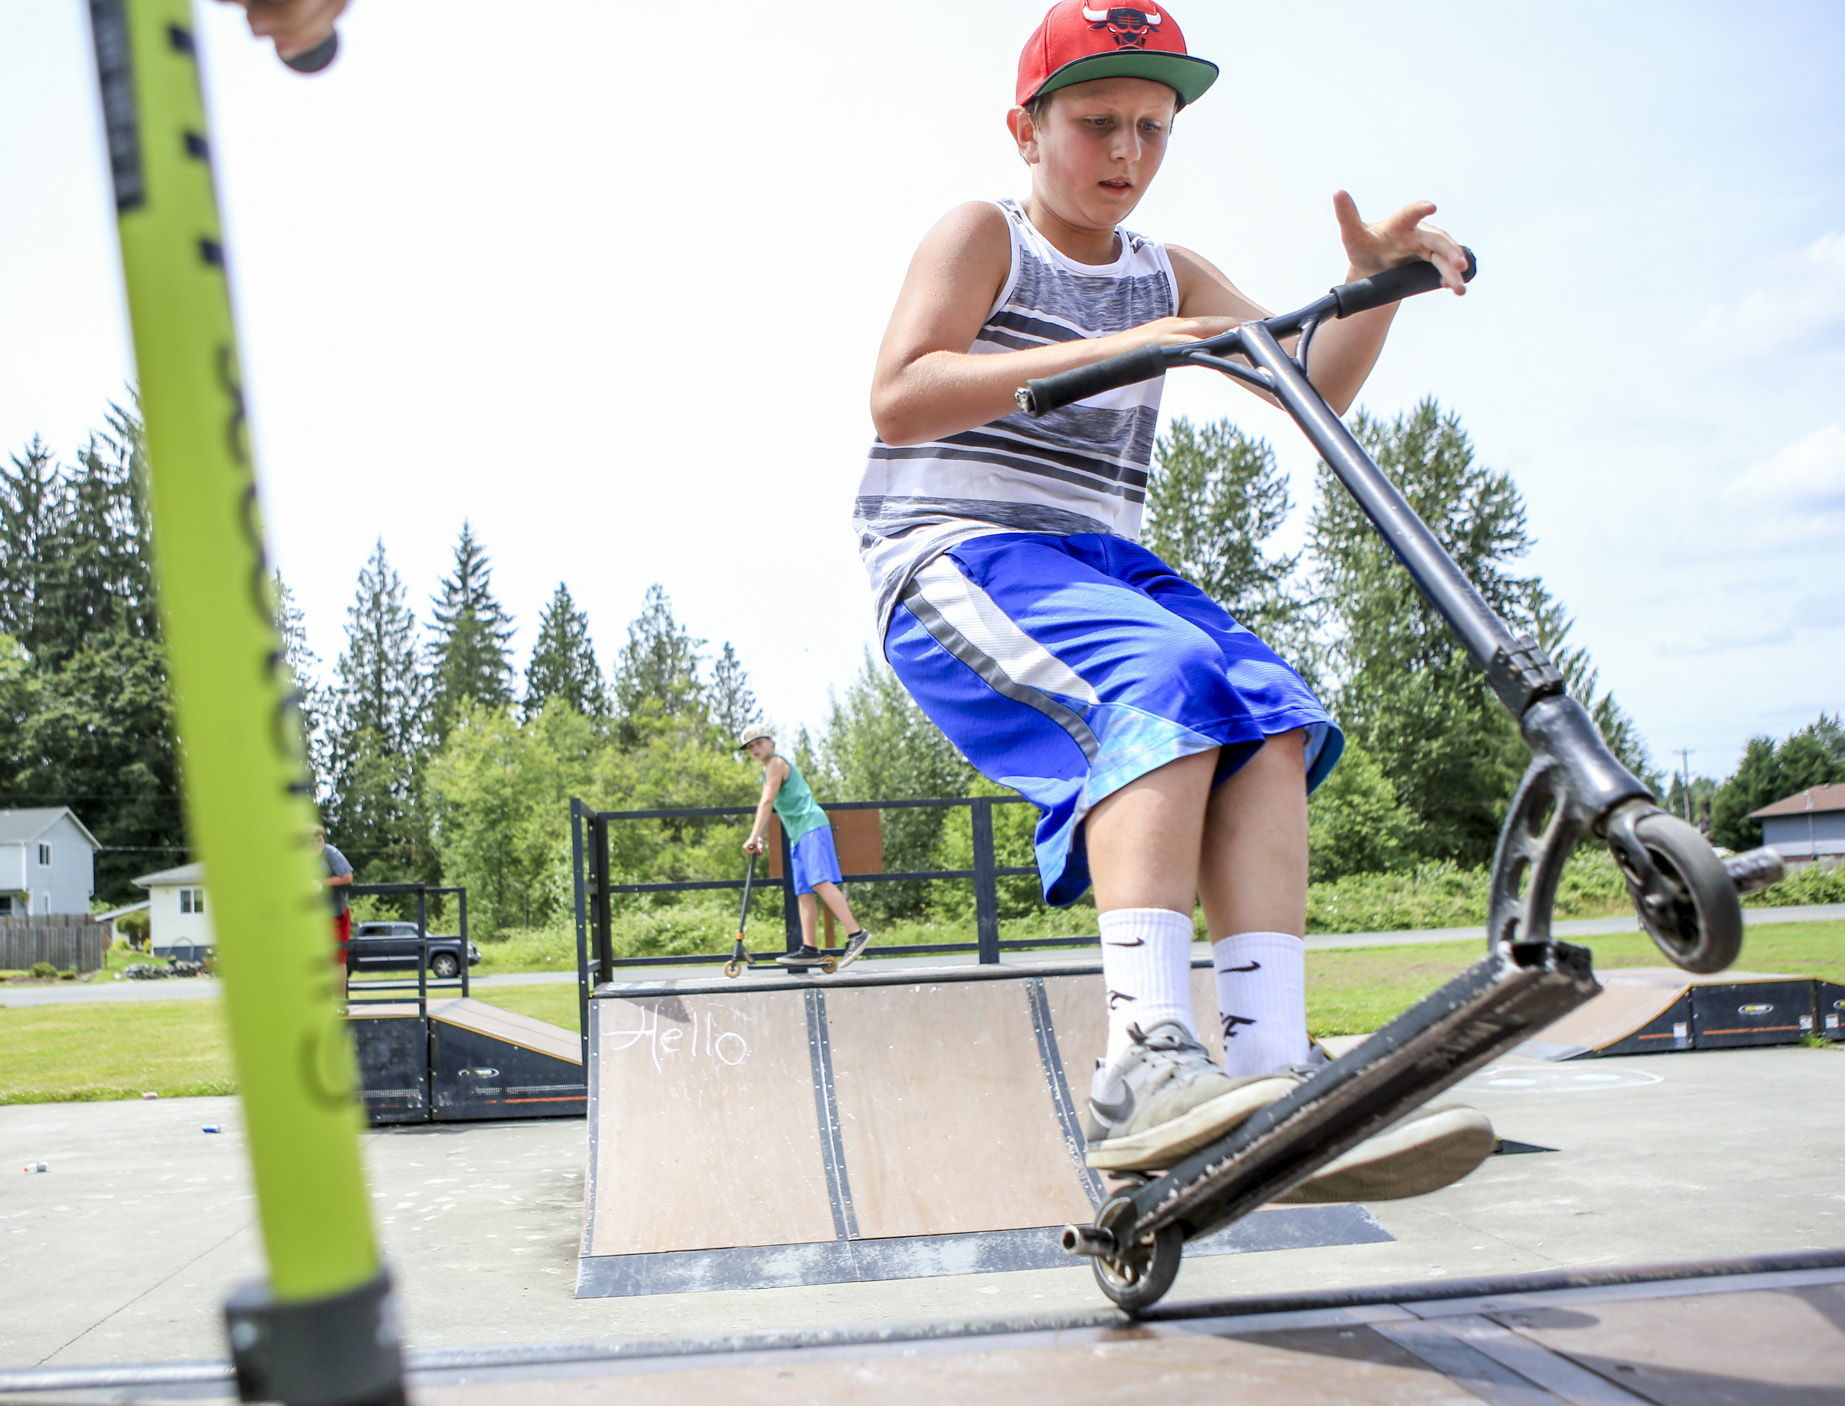 Gage Bain, 13, works the ramps Wednesday afternoon at the Jim Holm Park in Granite Falls. The downtown stake park will receive $51,600 to overhaul and install streetscape-style obstacles that are expected to appeal to a wider variety of riders.